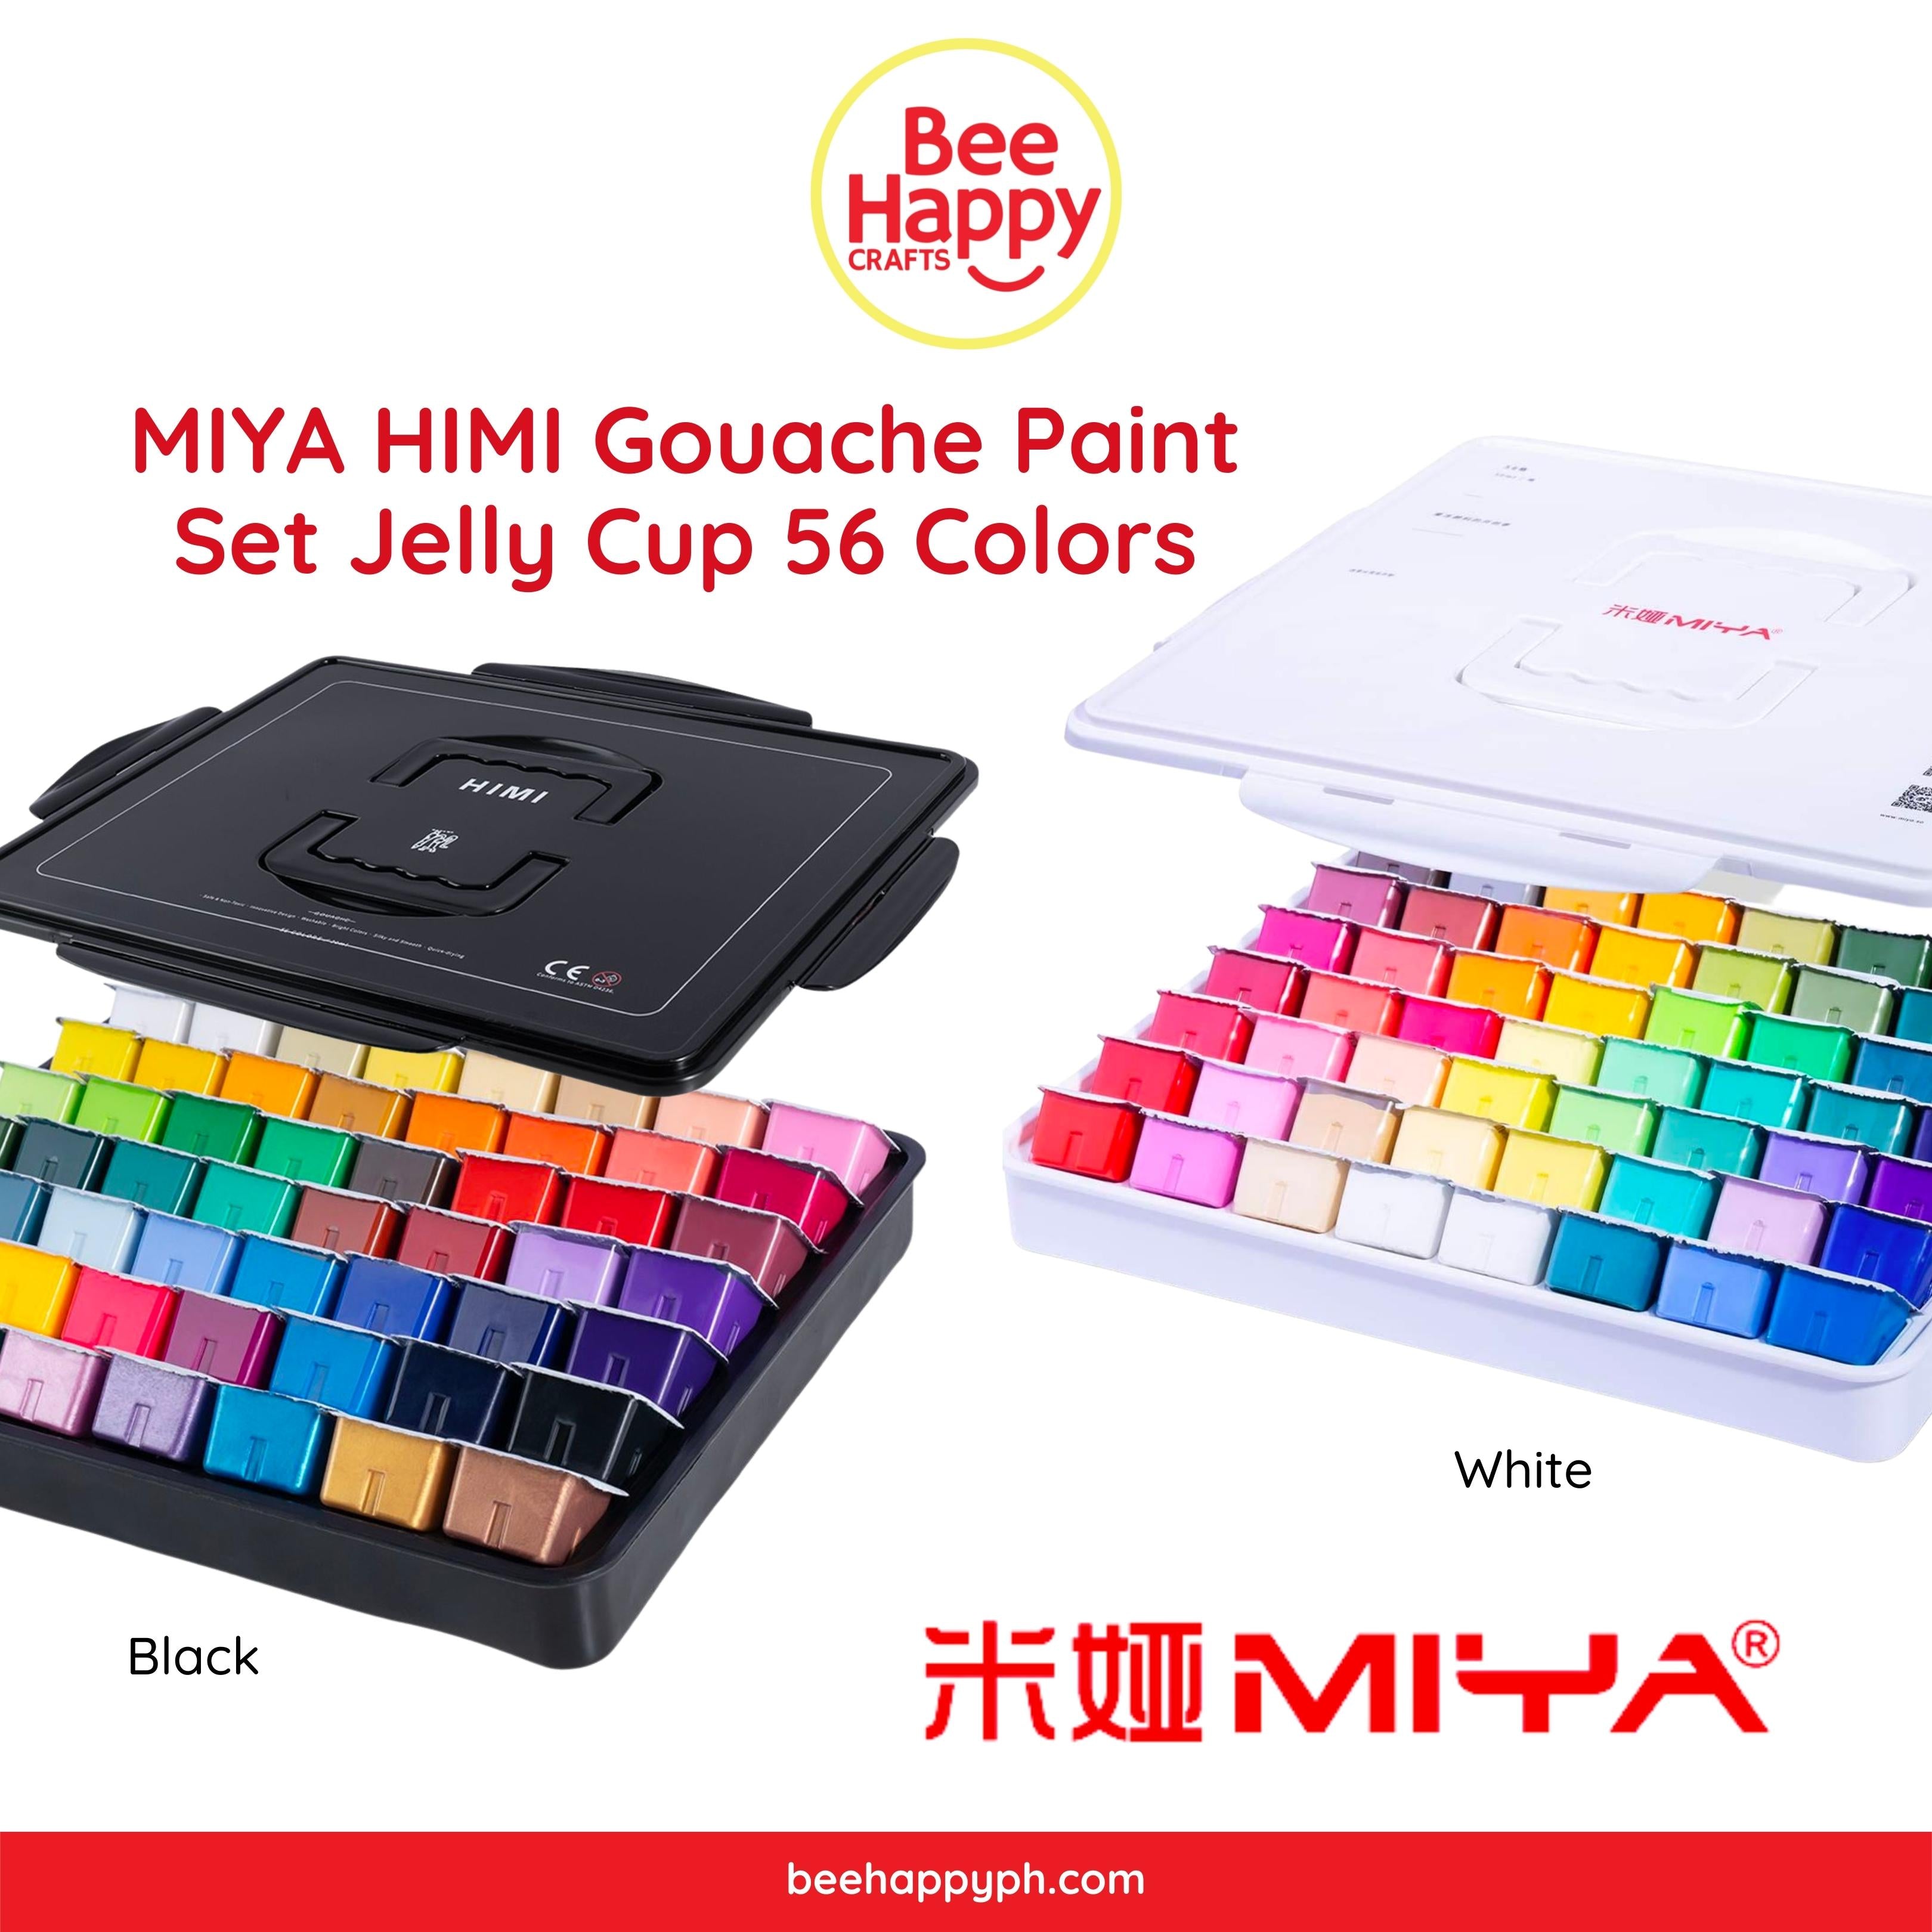 MIYA HIMI 18 Colors Suitable for Students Children's Painting